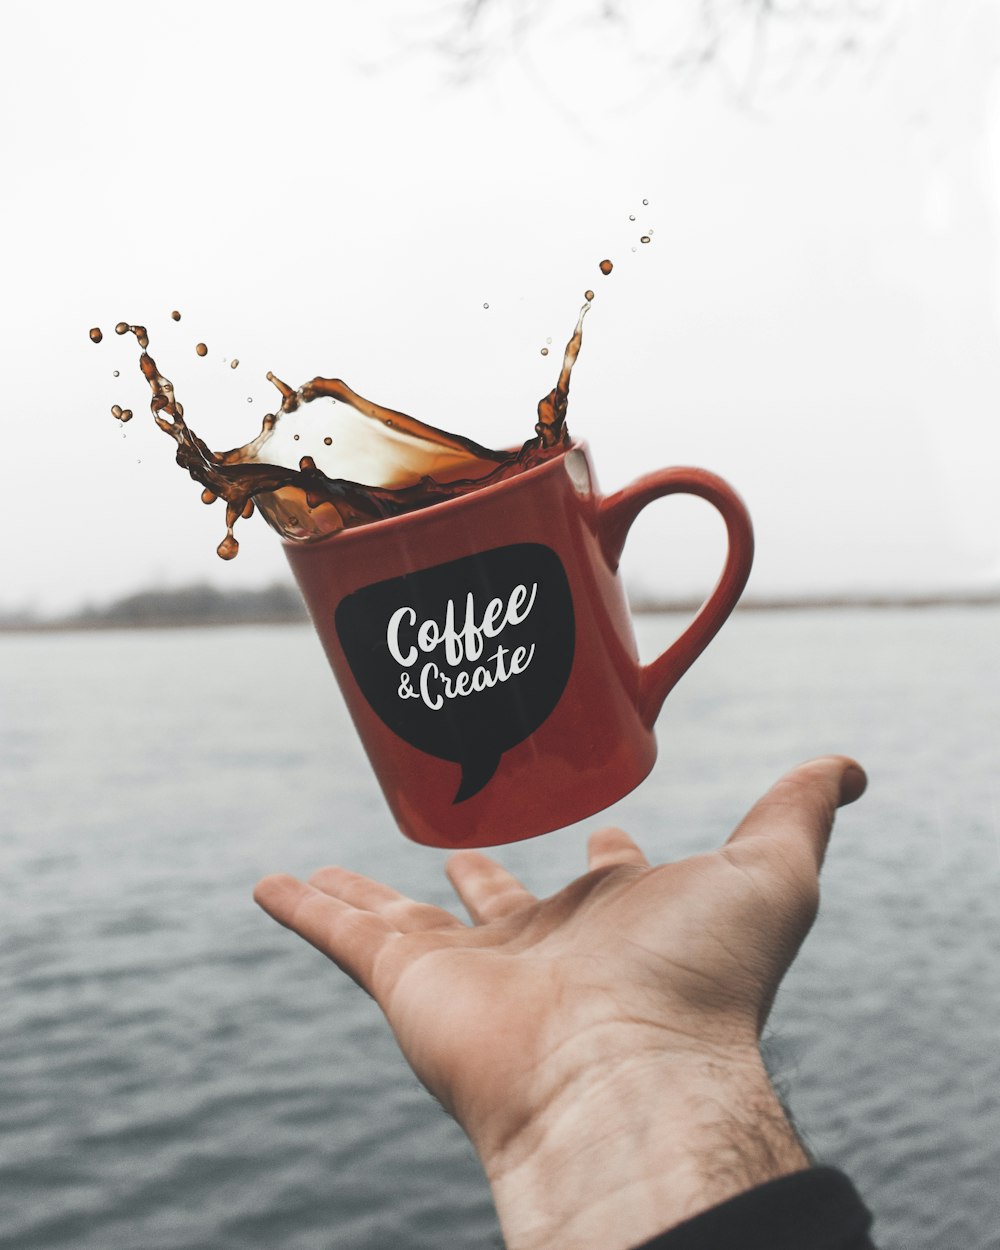 500+ Coffee Mug Pictures | Download Free Images on Unsplash